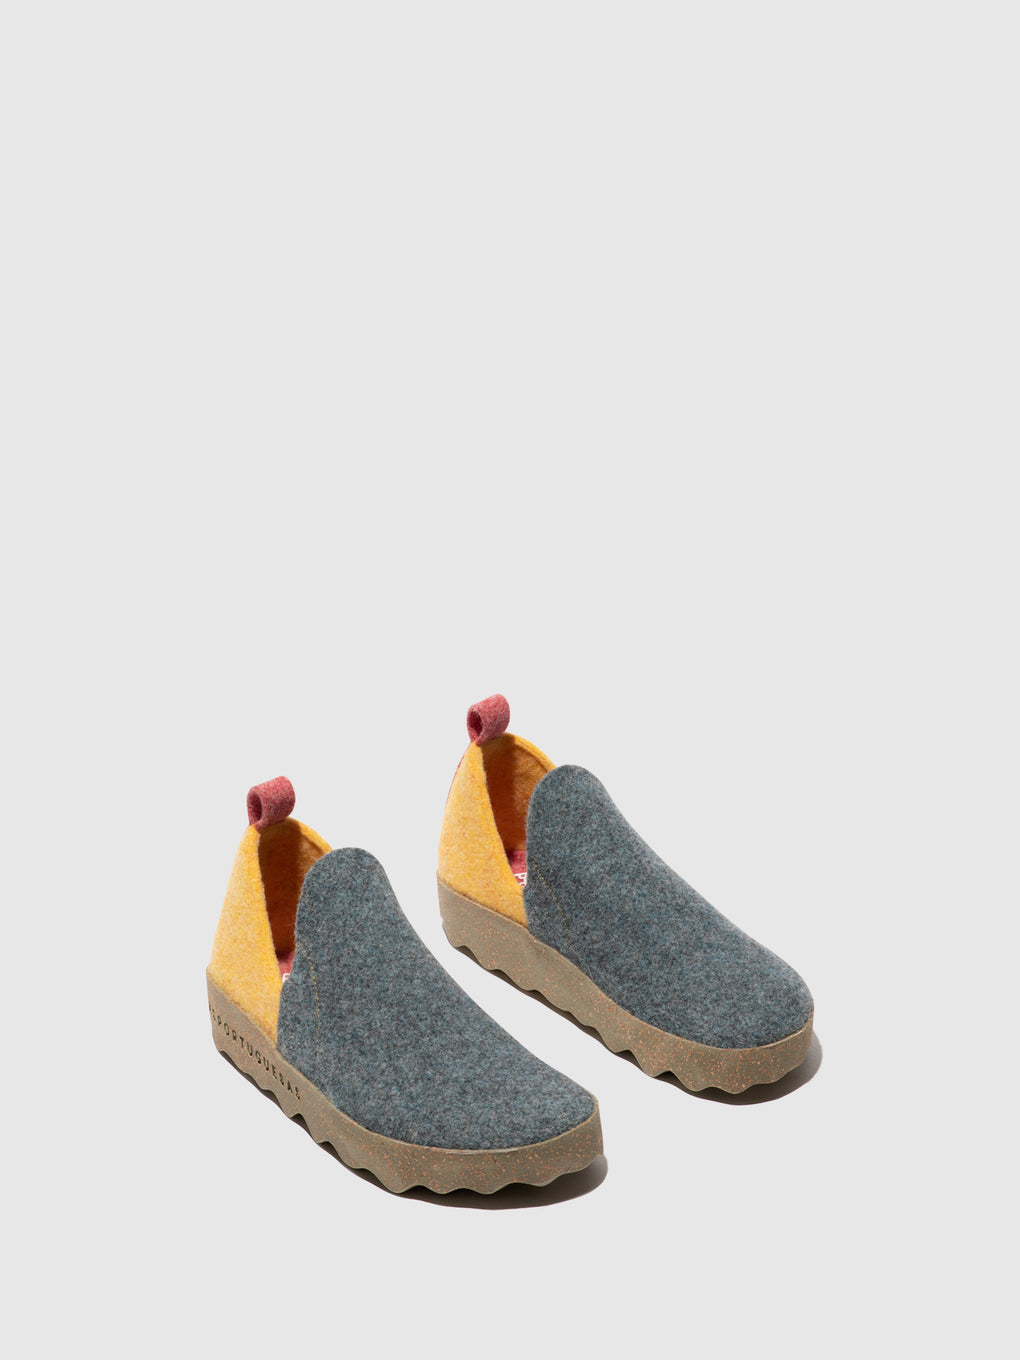 Round Toe Shoes CITY GREY BLUE/YELLOW